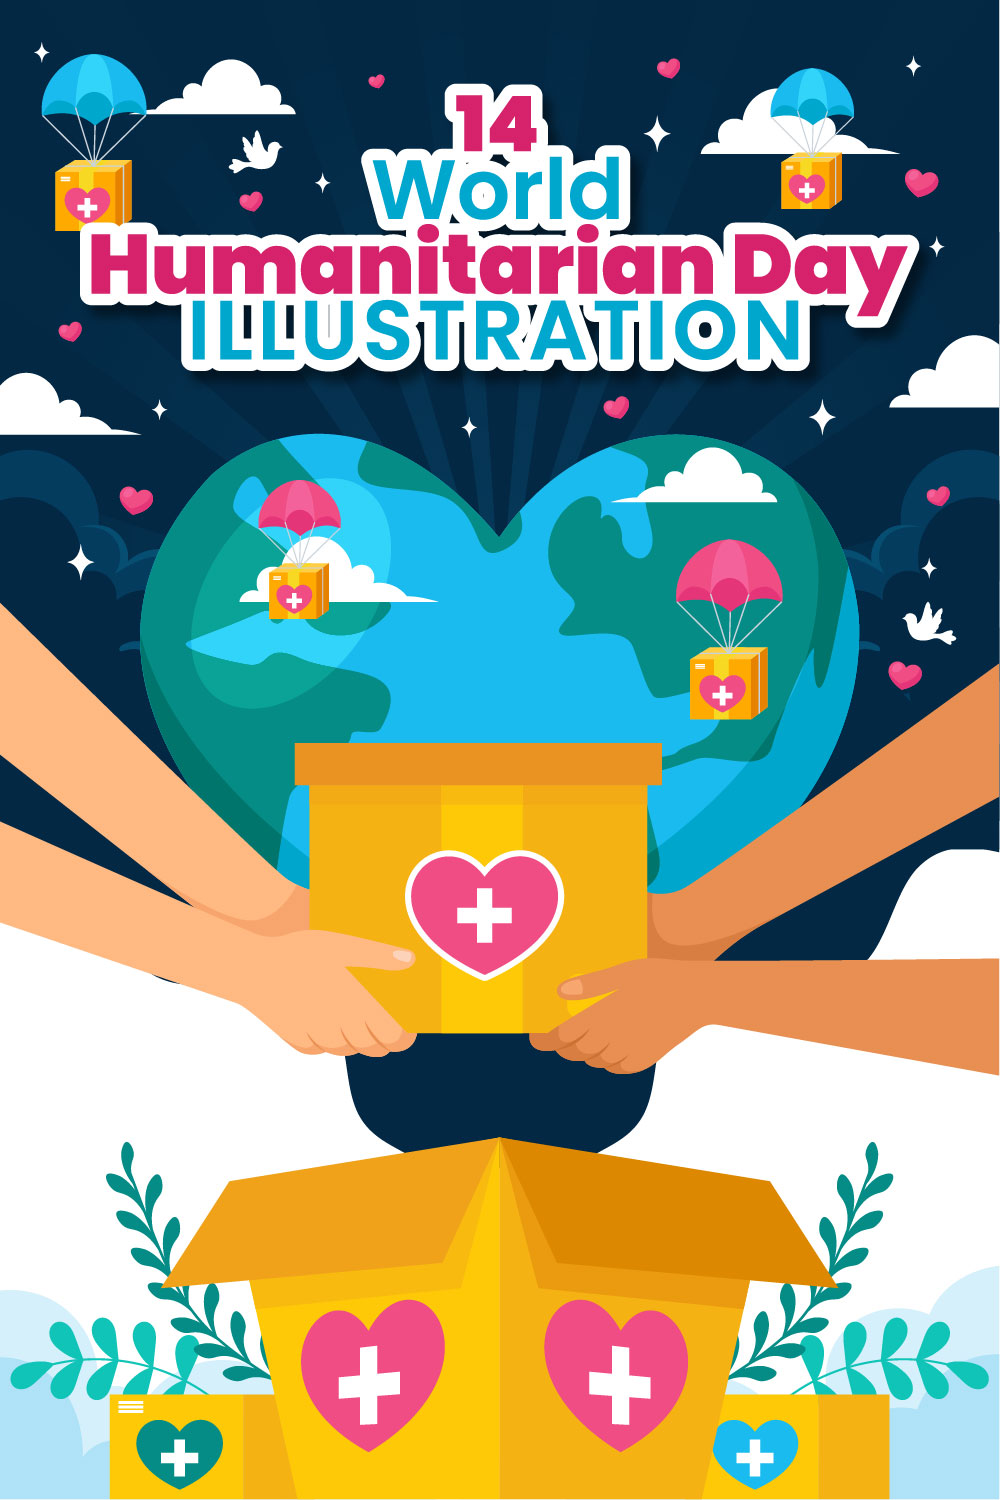 14 World Humanitarian Day Illustration pinterest preview image.